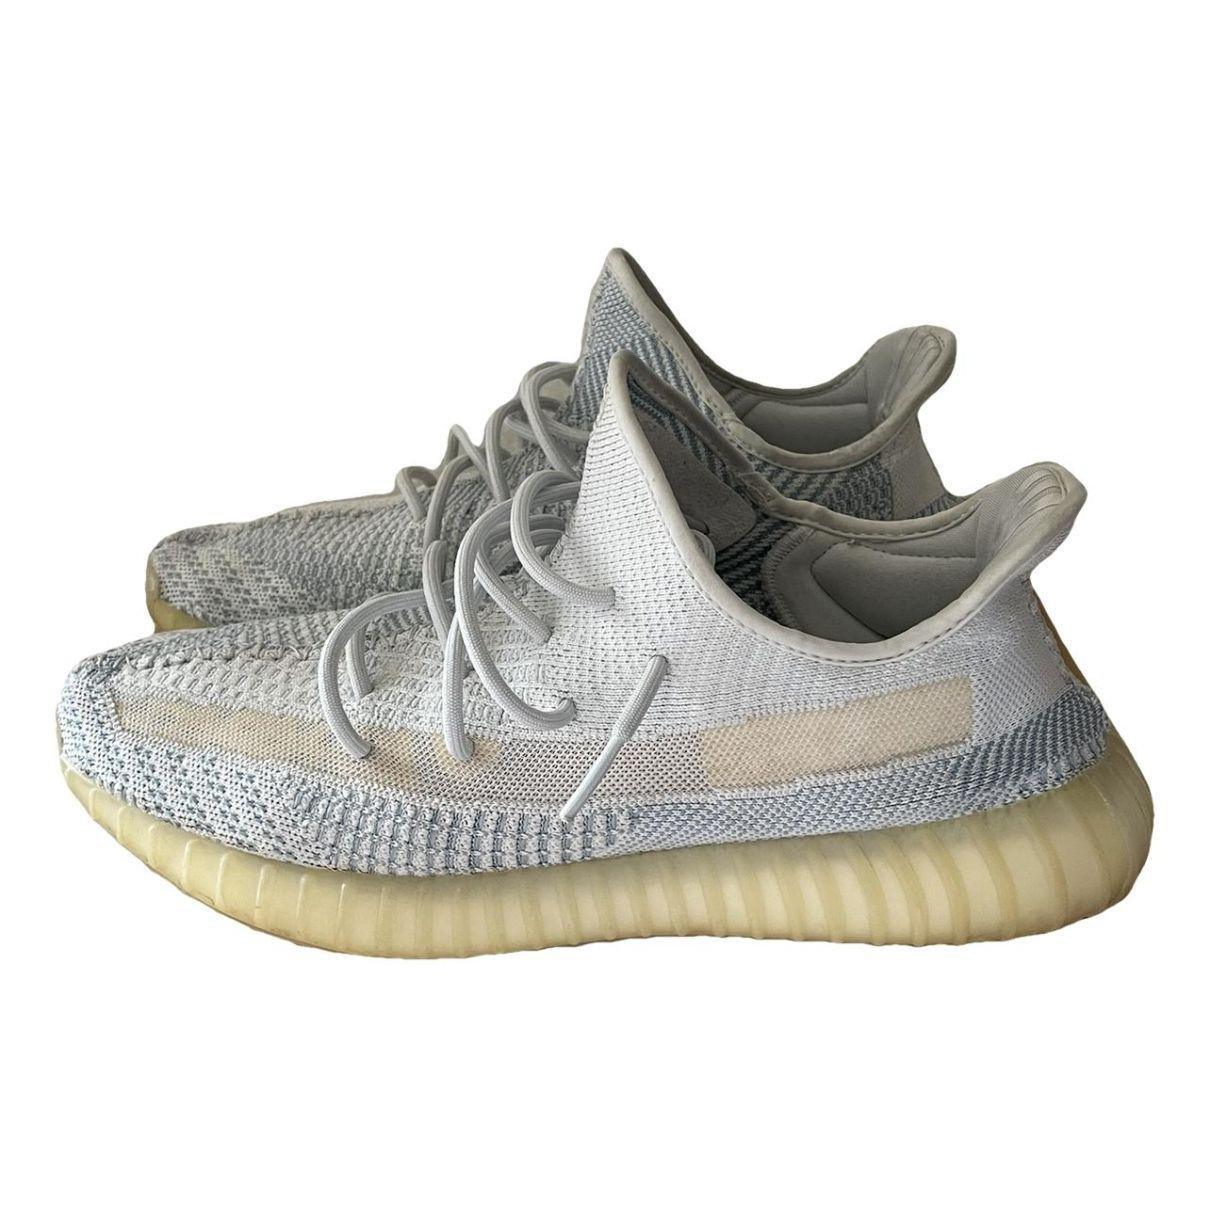 Boost 350 V2 cloth low trainers by YEEZY X ADIDAS